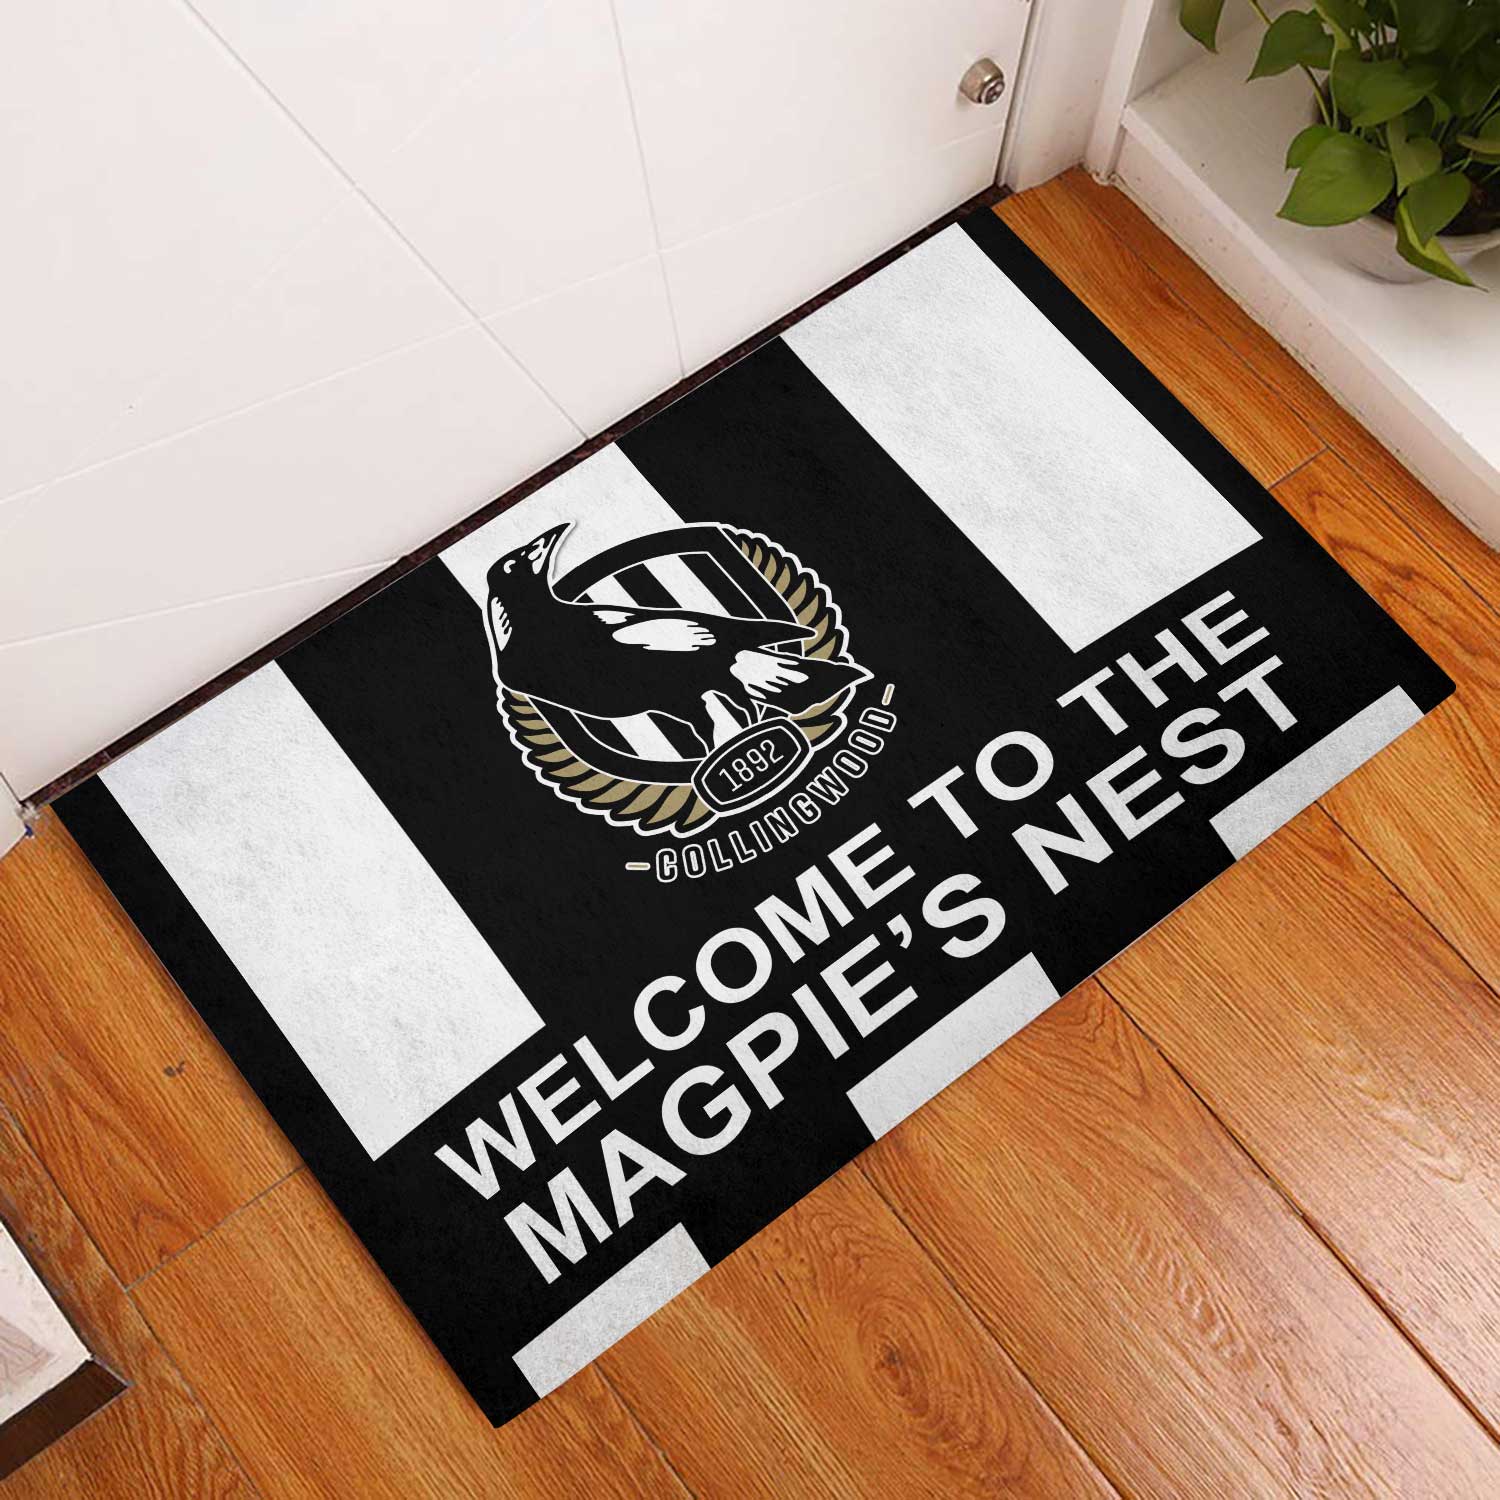 Collingwood Magpies Welcome To The Magpie's Nest Rubber Doormat